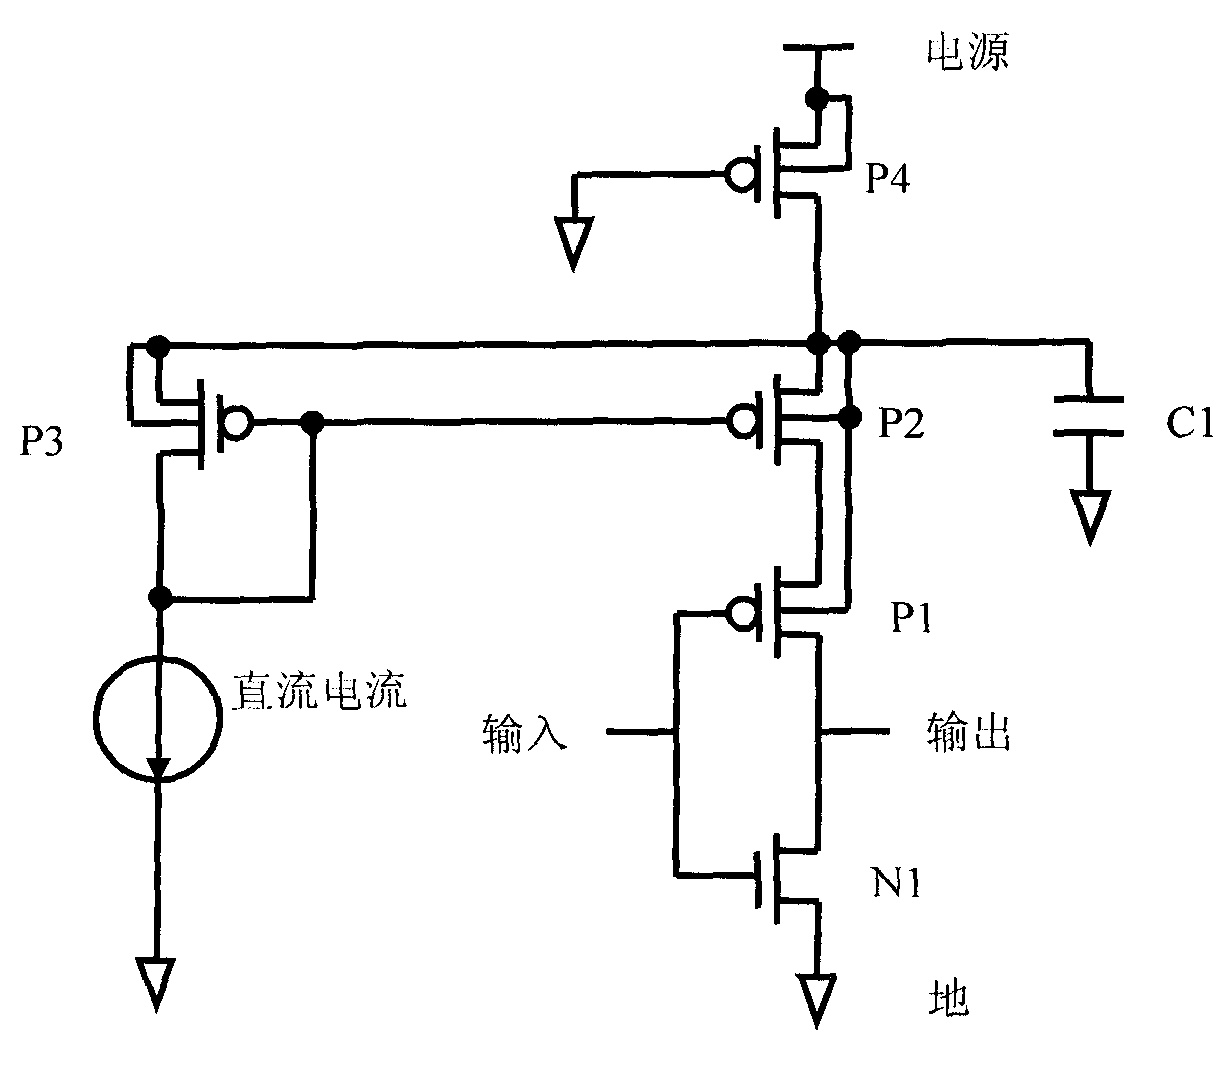 Circuit for lowering CMOS transient power consumption